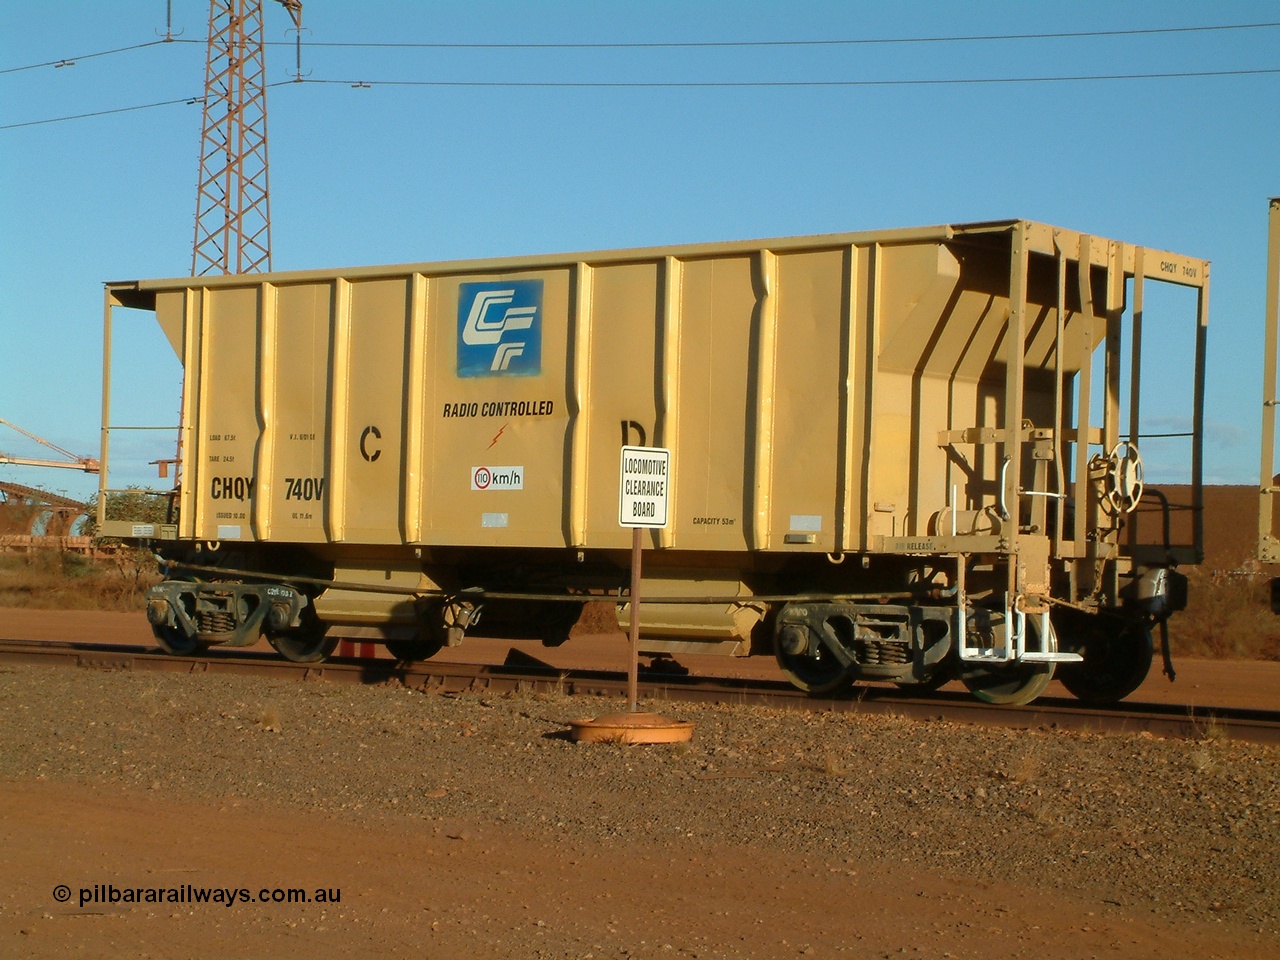 040815 164638
Nelson Point, CFCLA ballast waggon CHQY type 740 just being delivered to BHP Iron Ore as part of the Rail PACE project, 3/4 view from handbrake end.
Keywords: CHQY-type;CHQY740;CFCLA;CRDX-type;BHP-ballast-waggon;